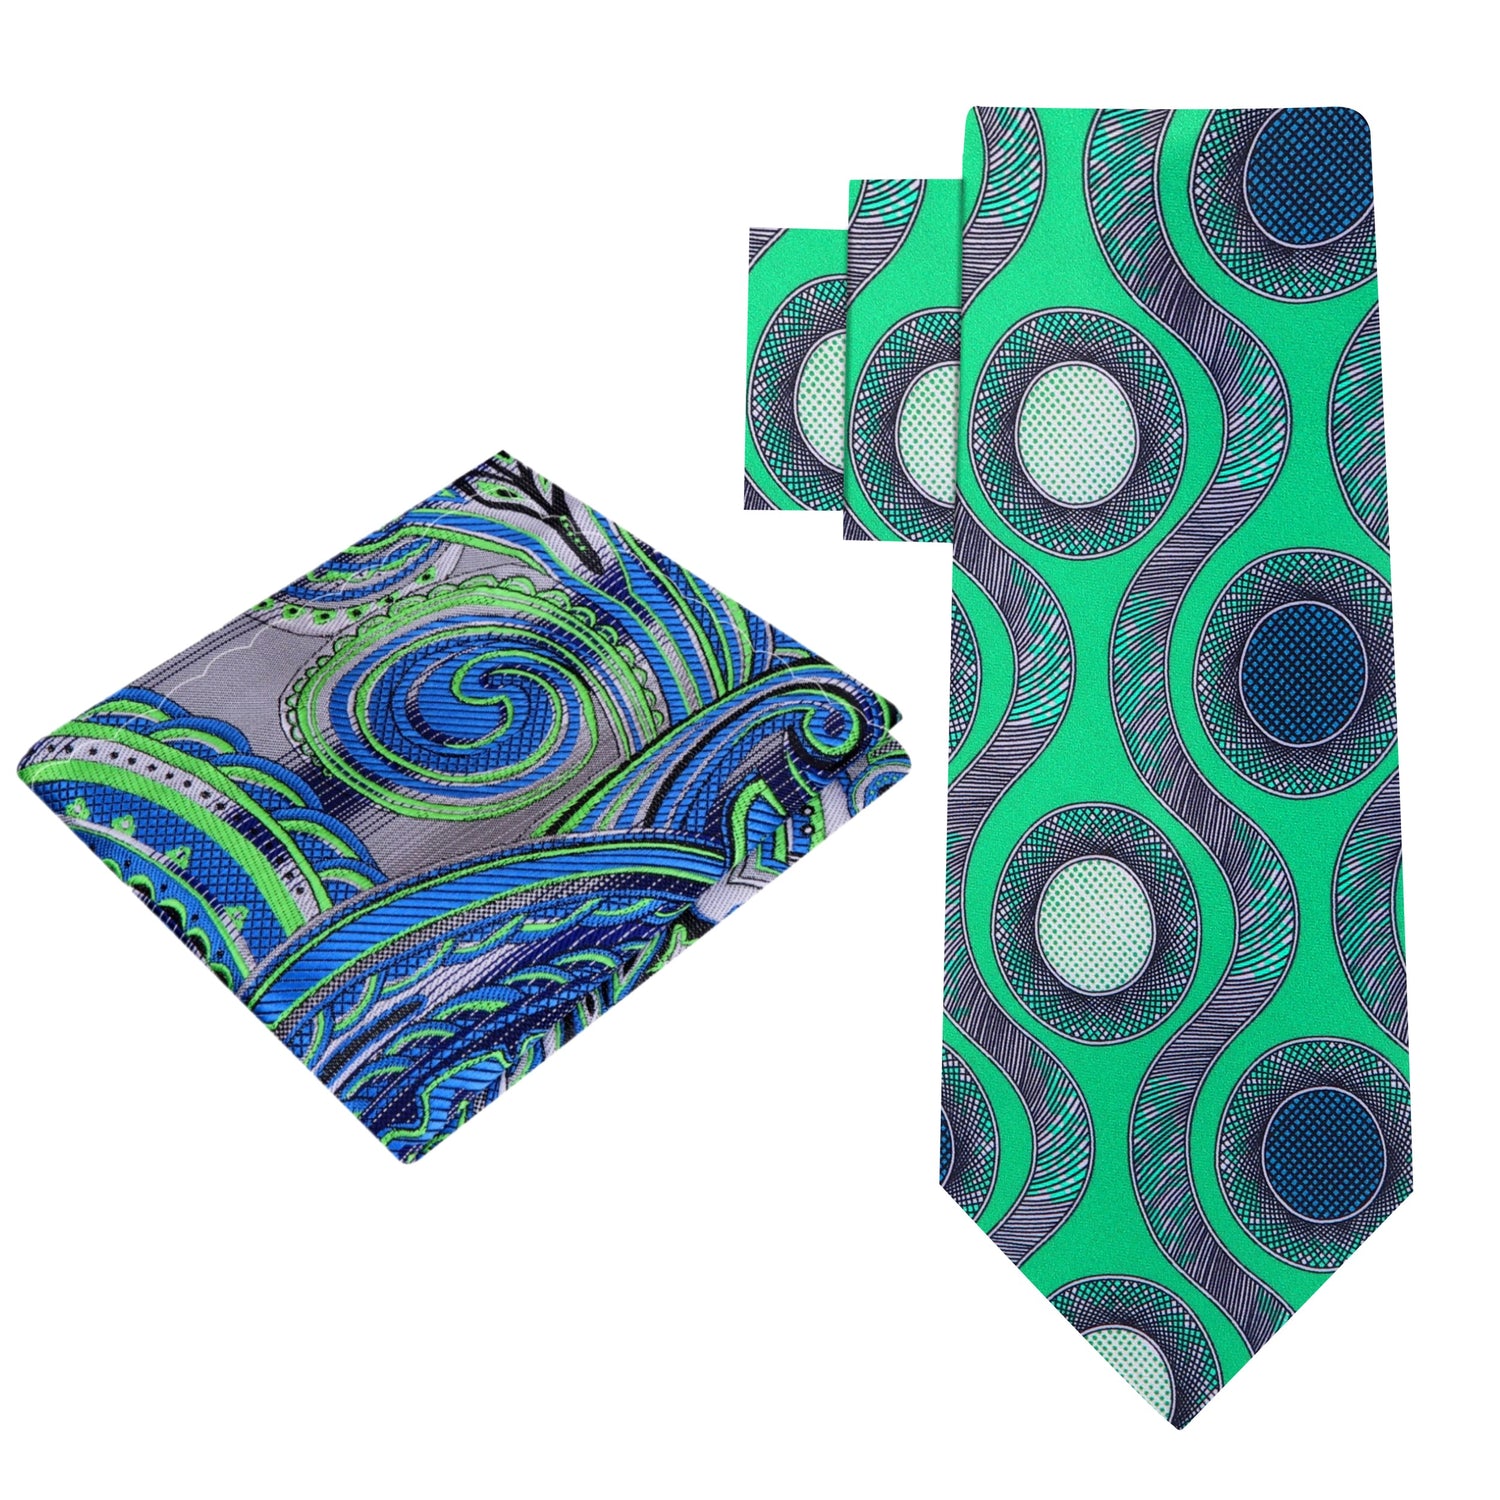 Alt View: Green Blue Waves and Circles Tie and Accenting Square